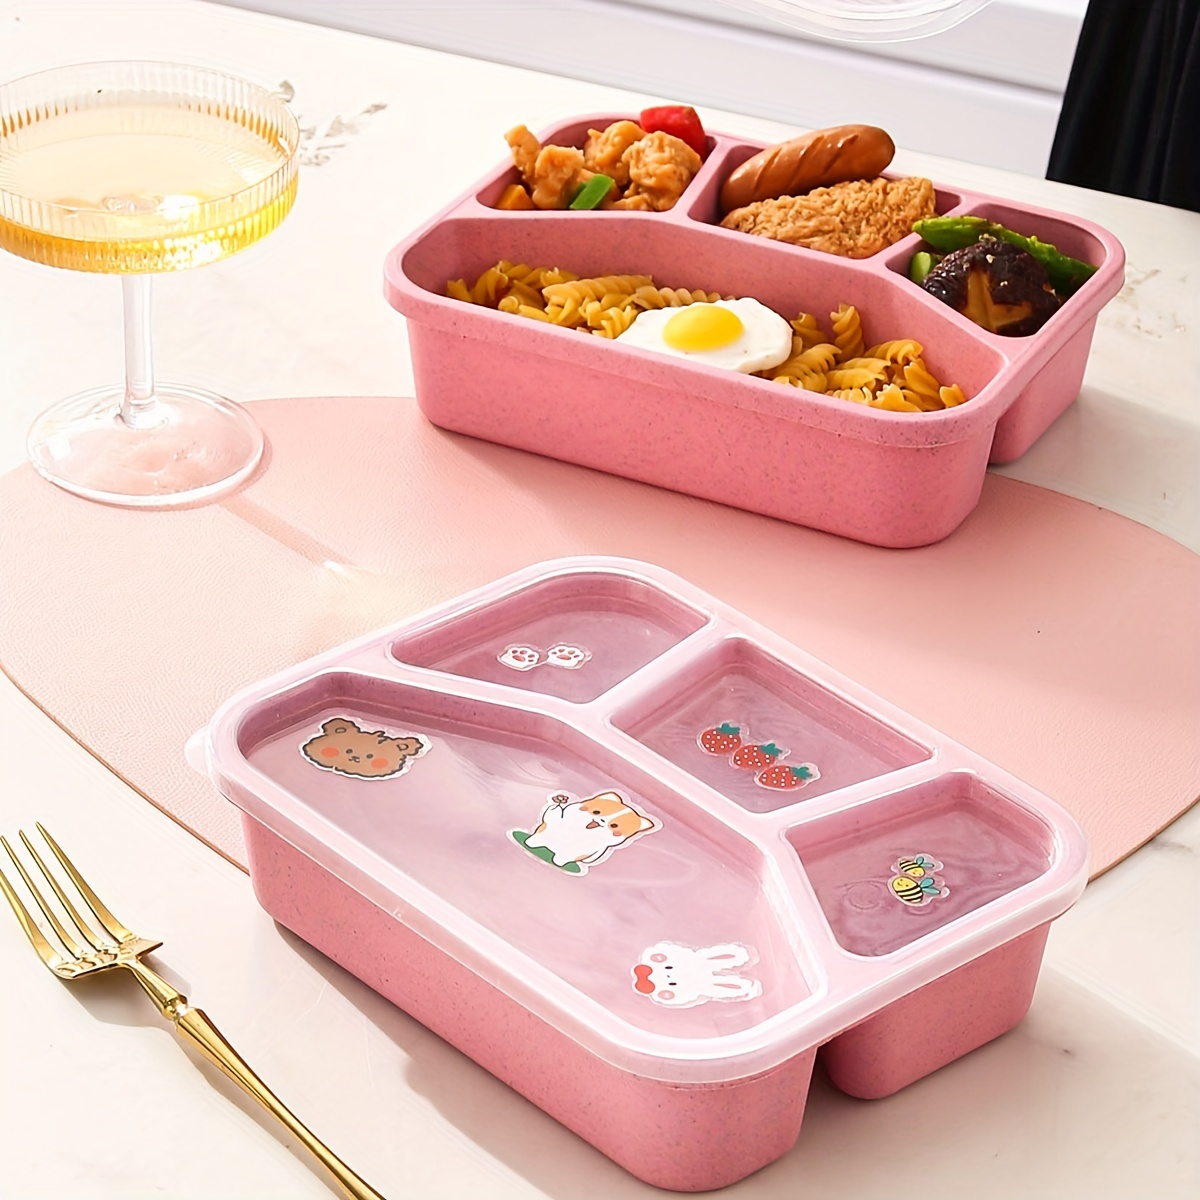 NEW - Lunch Box Adult & Kid With Bag - Wheat Straw, Japanese Bento